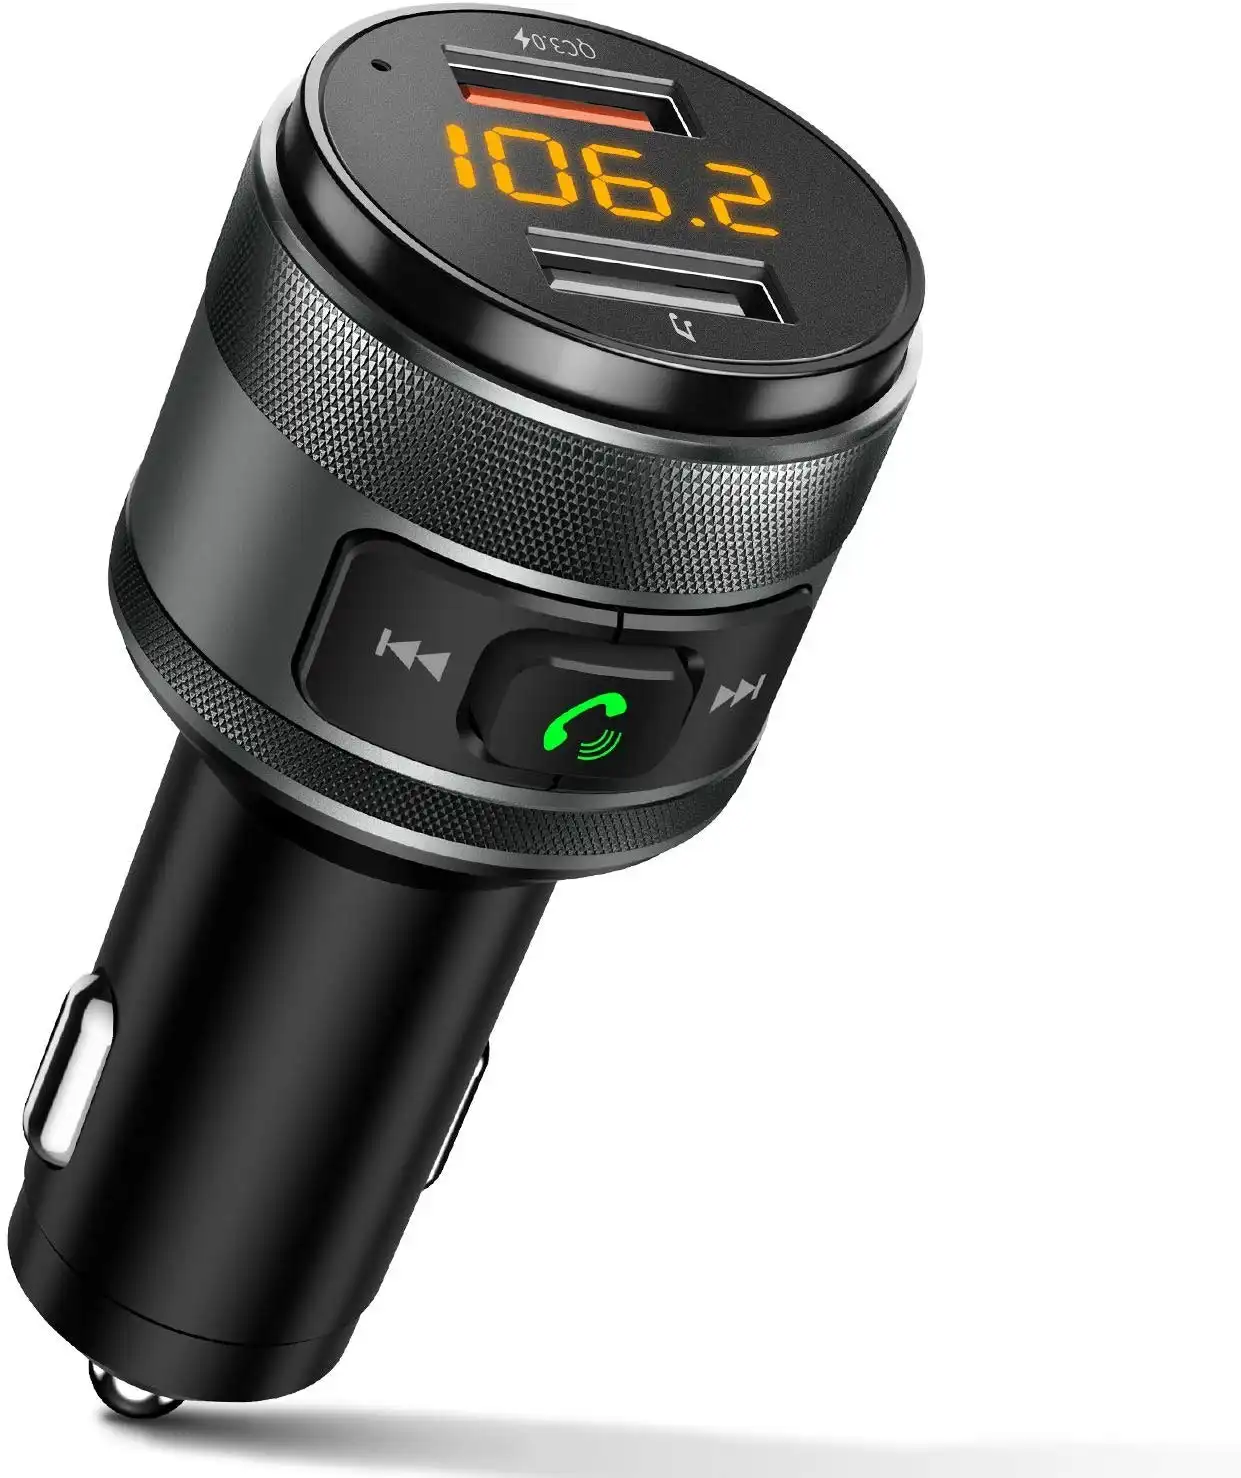 IMDEN Bluetooth FM transmitter for car, 3.0 Wireless Bluetooth FM Radio Adapter Music Player FM Transmitter/Car Kit with Hands Free Calling and 2 USB